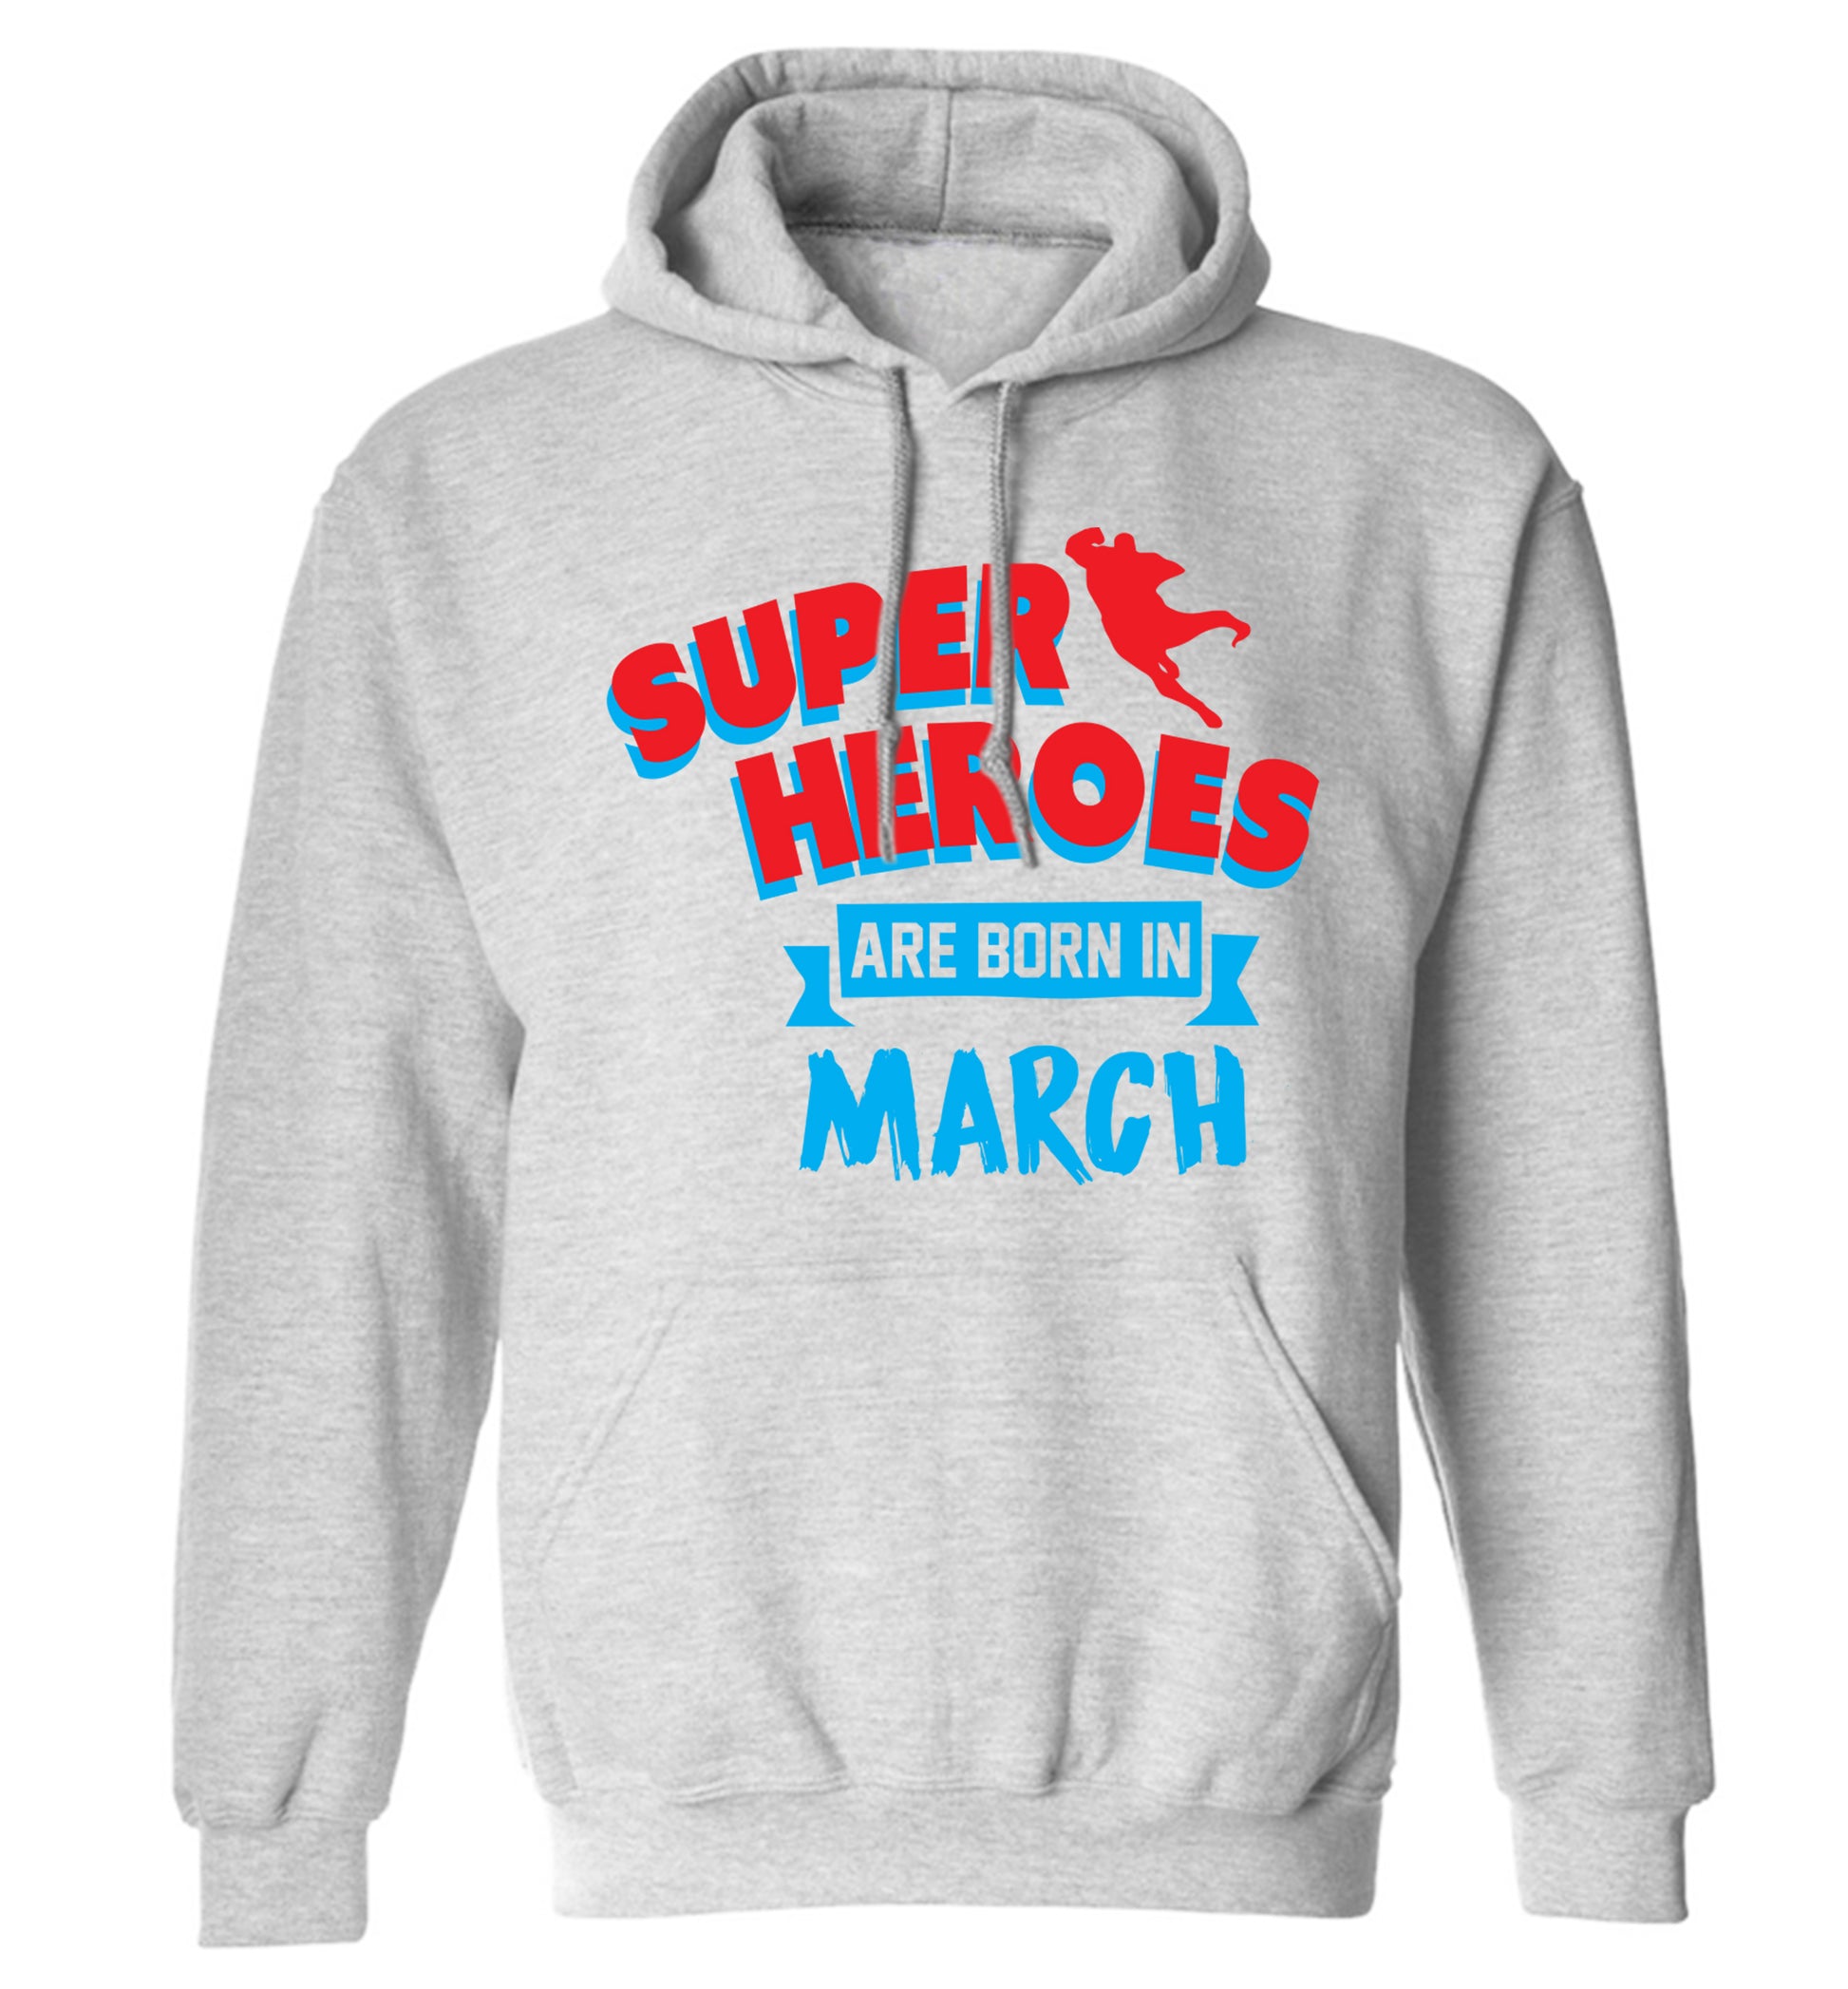 Superheros are born in March adults unisex grey hoodie 2XL